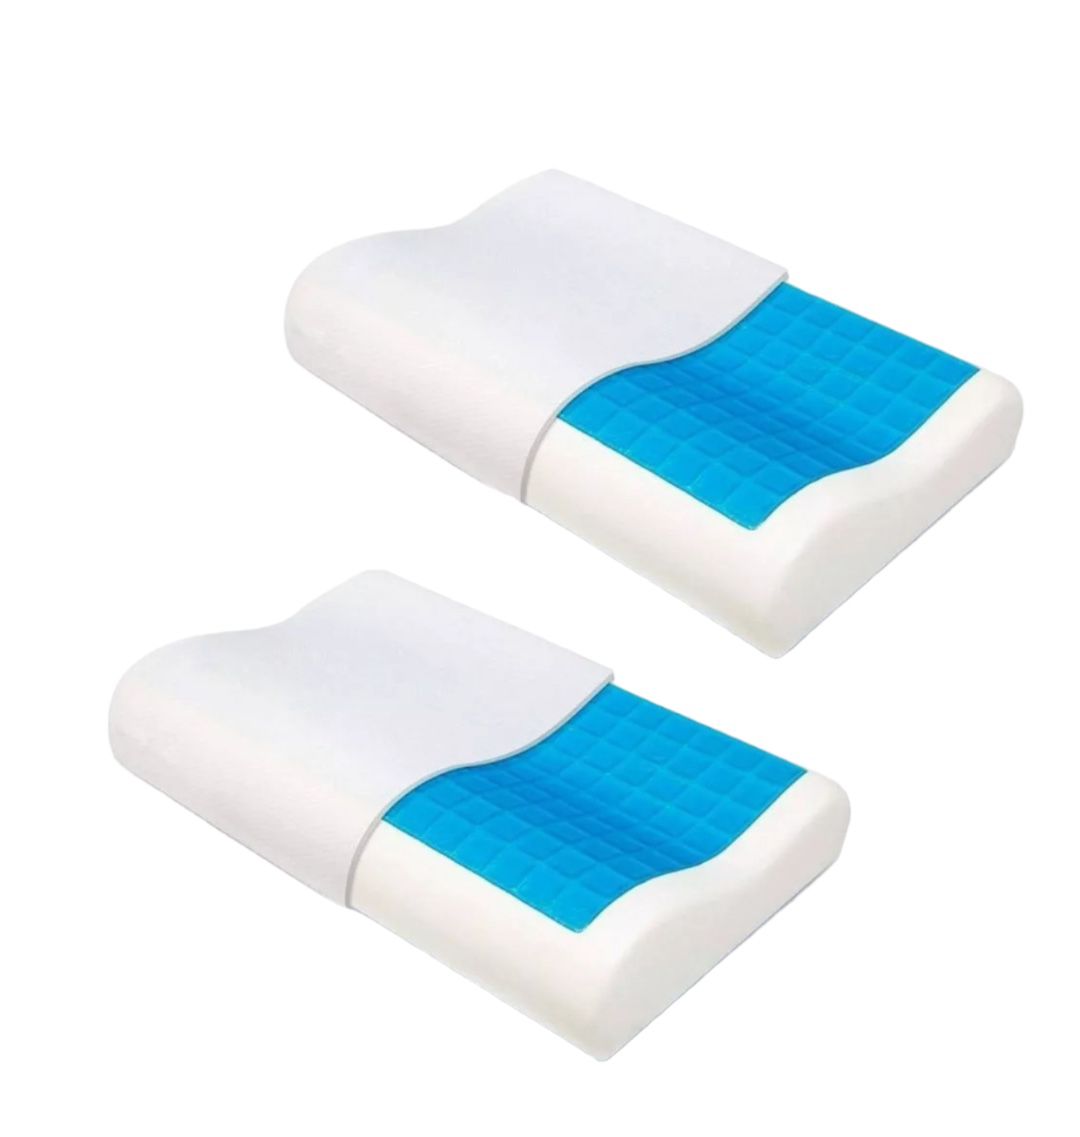 Combo X2 Almohadas Memory Pillow Ortopédica Indeformables Cool Gel Fund